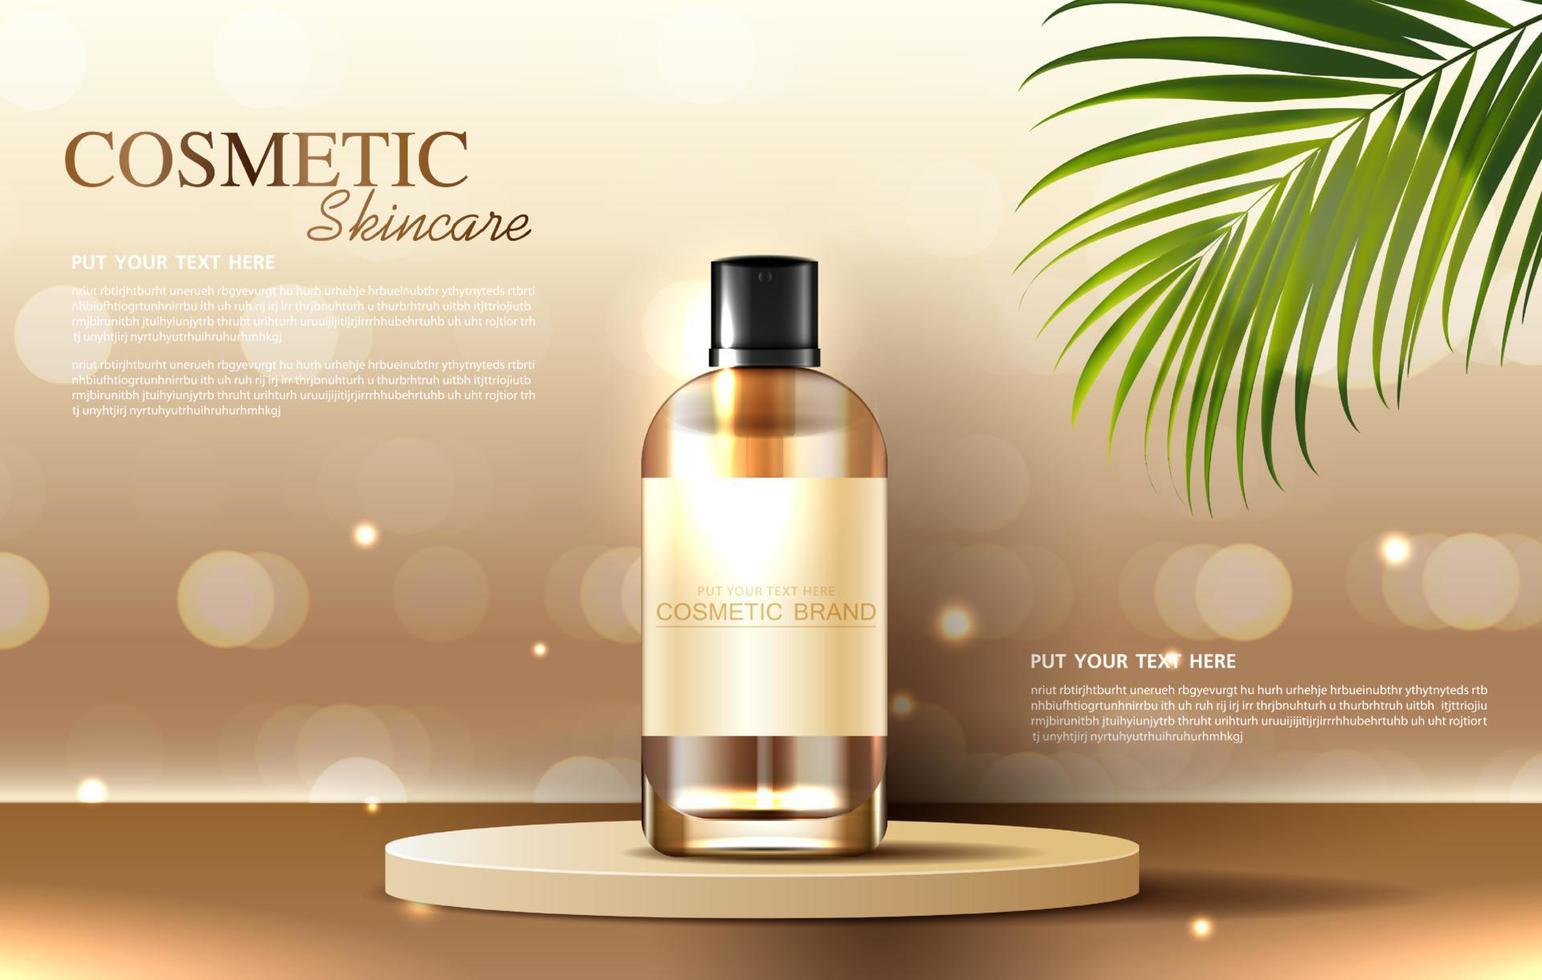 Cosmetics or skin care product ads with bottle, banner ad for beauty products and sky background glittering light effect. vector design